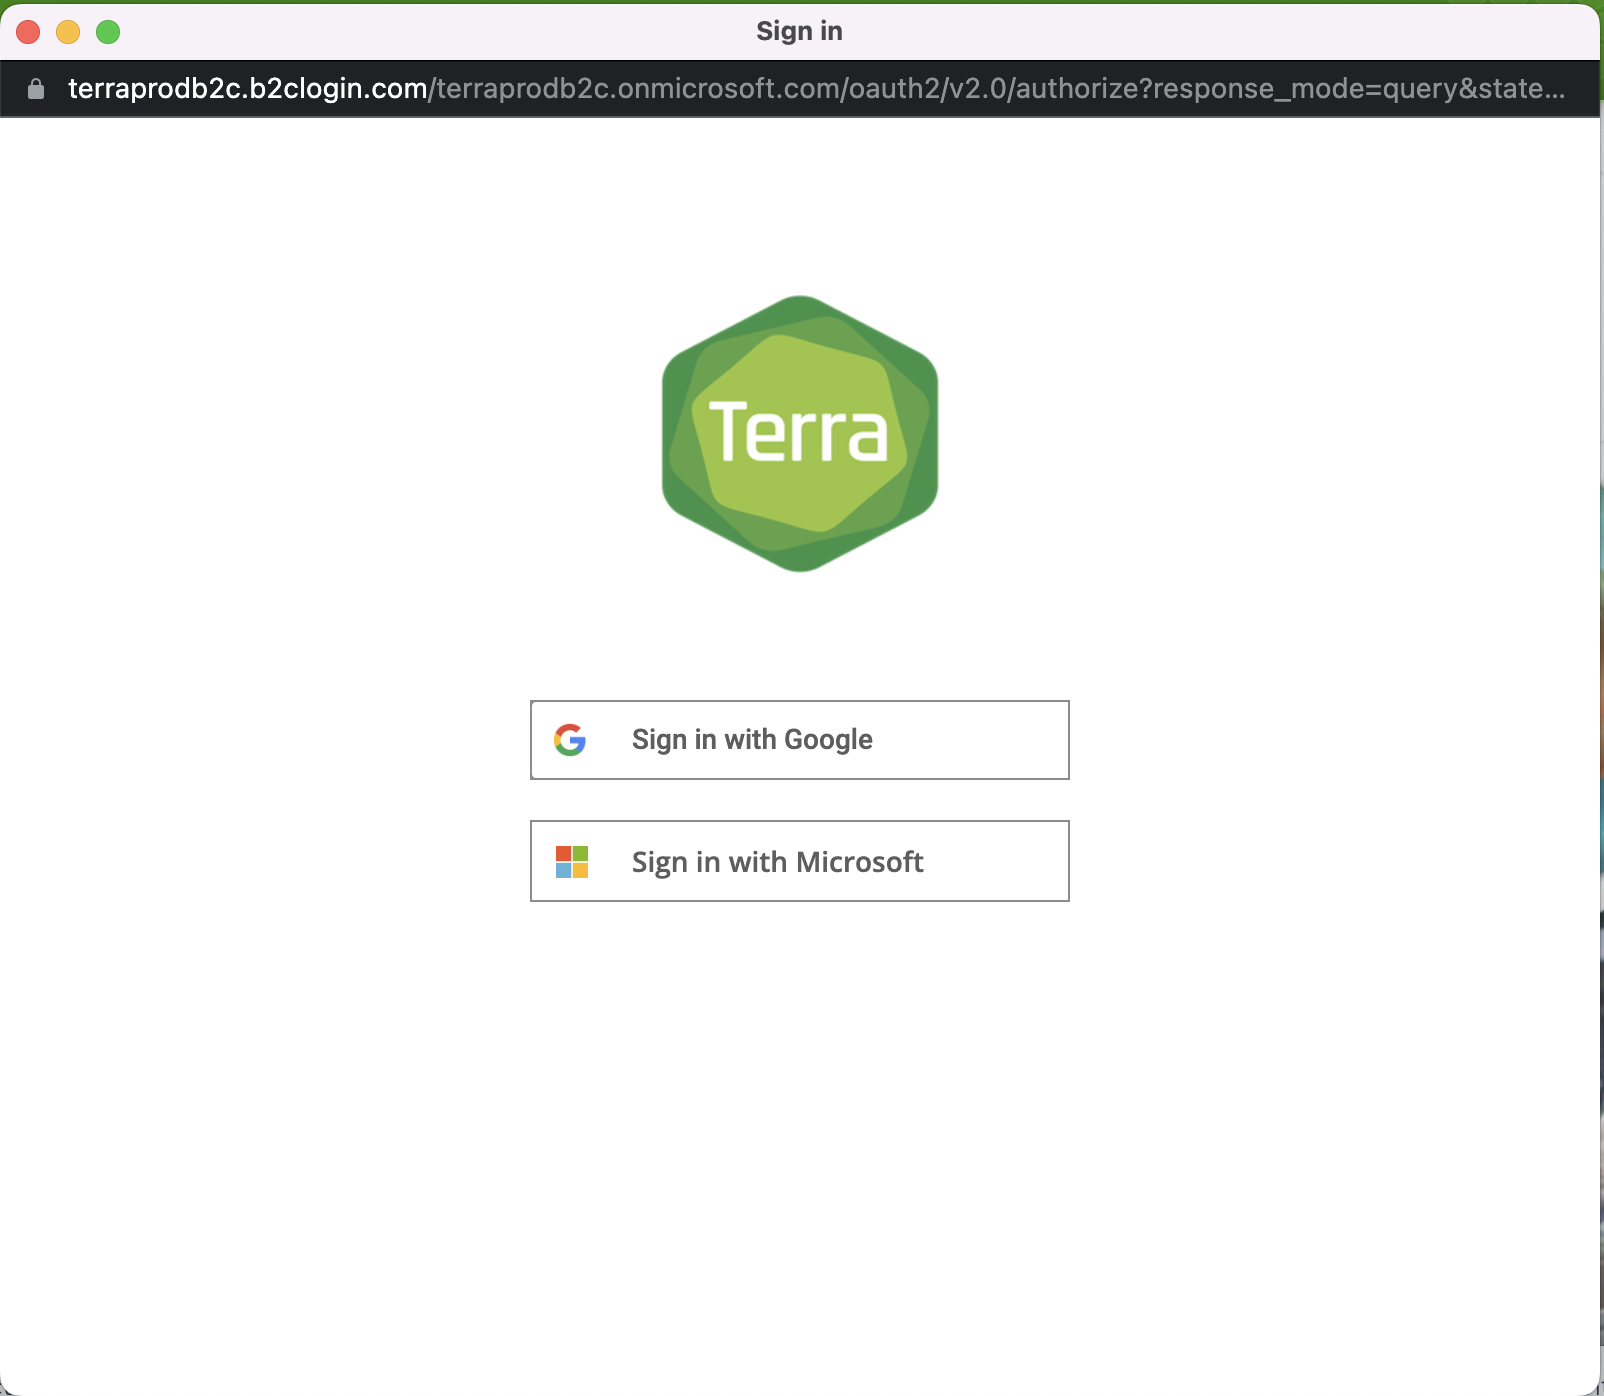 Screenshot of the single sign on popup with options to sign in using Google or Microsoft below the Terra logo